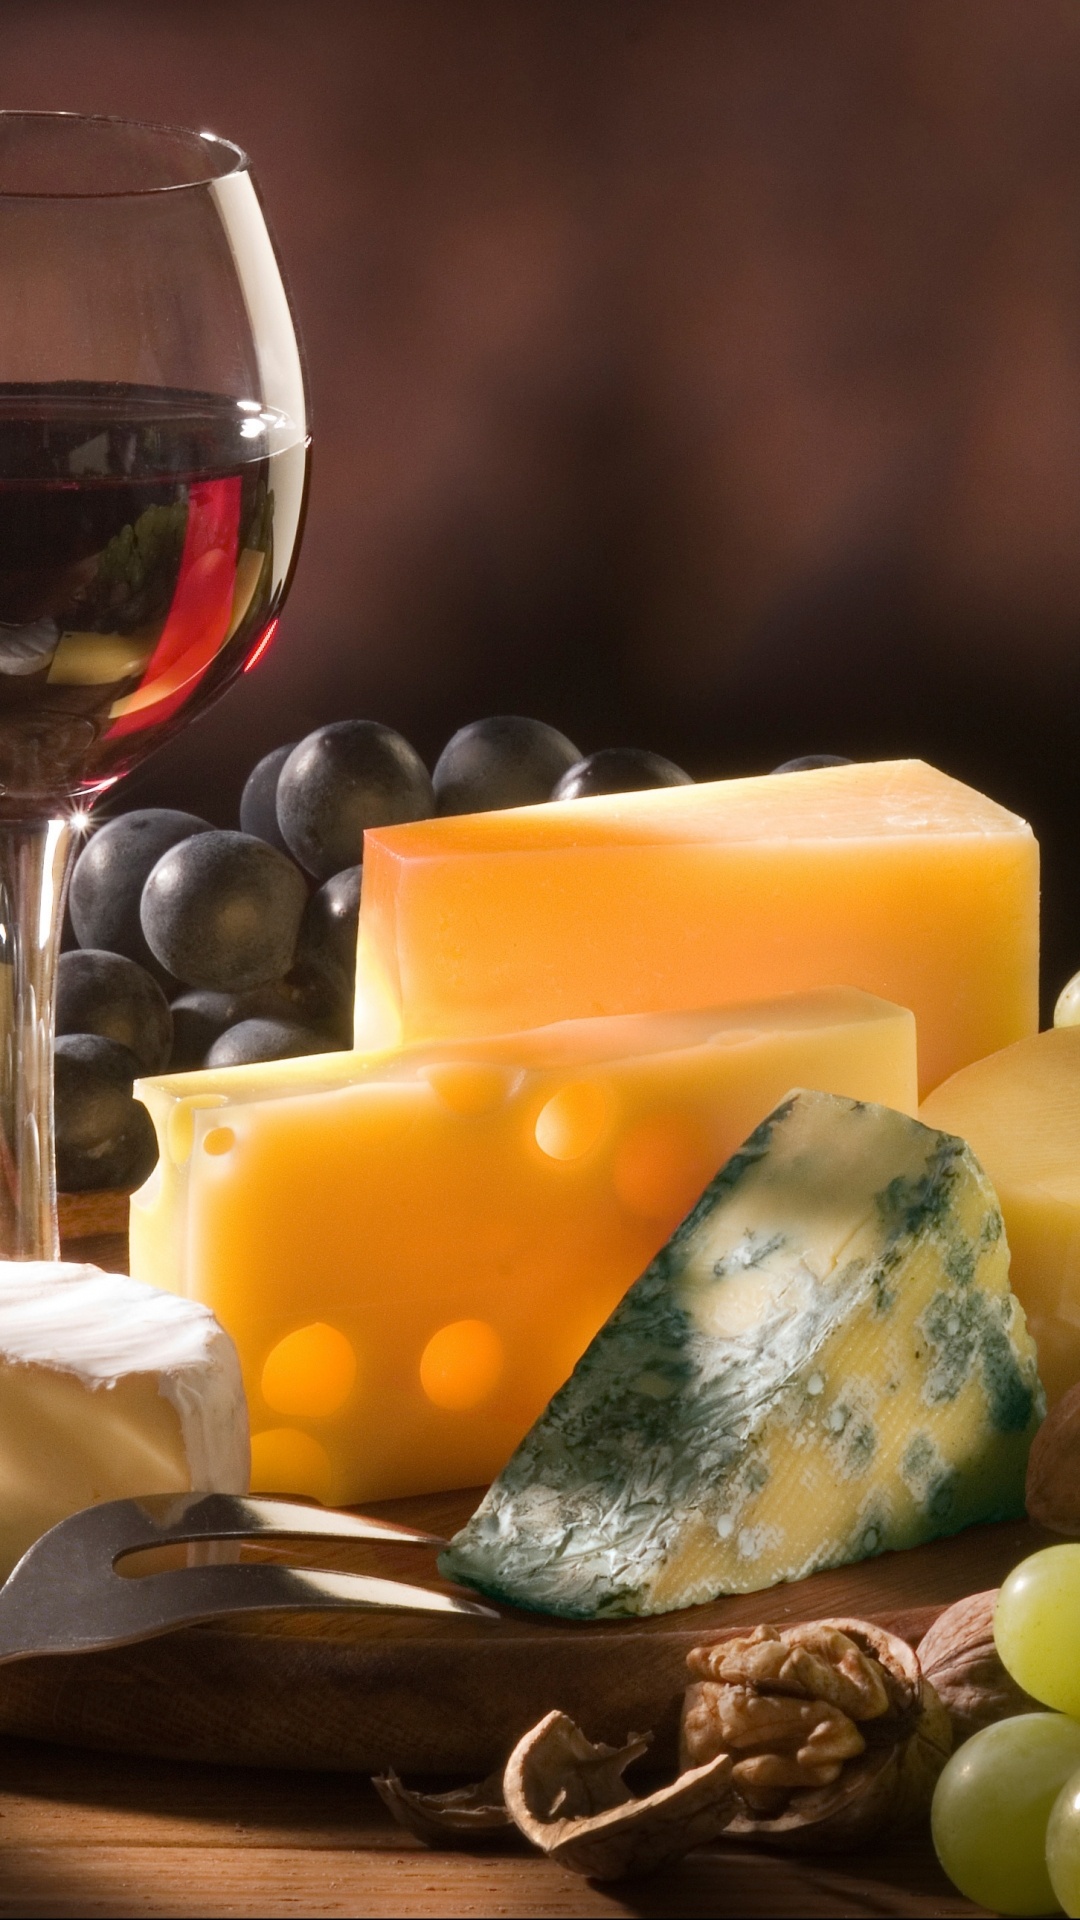 Cheese: Often paired with wine to enhance the flavors of both. 1080x1920 Full HD Wallpaper.